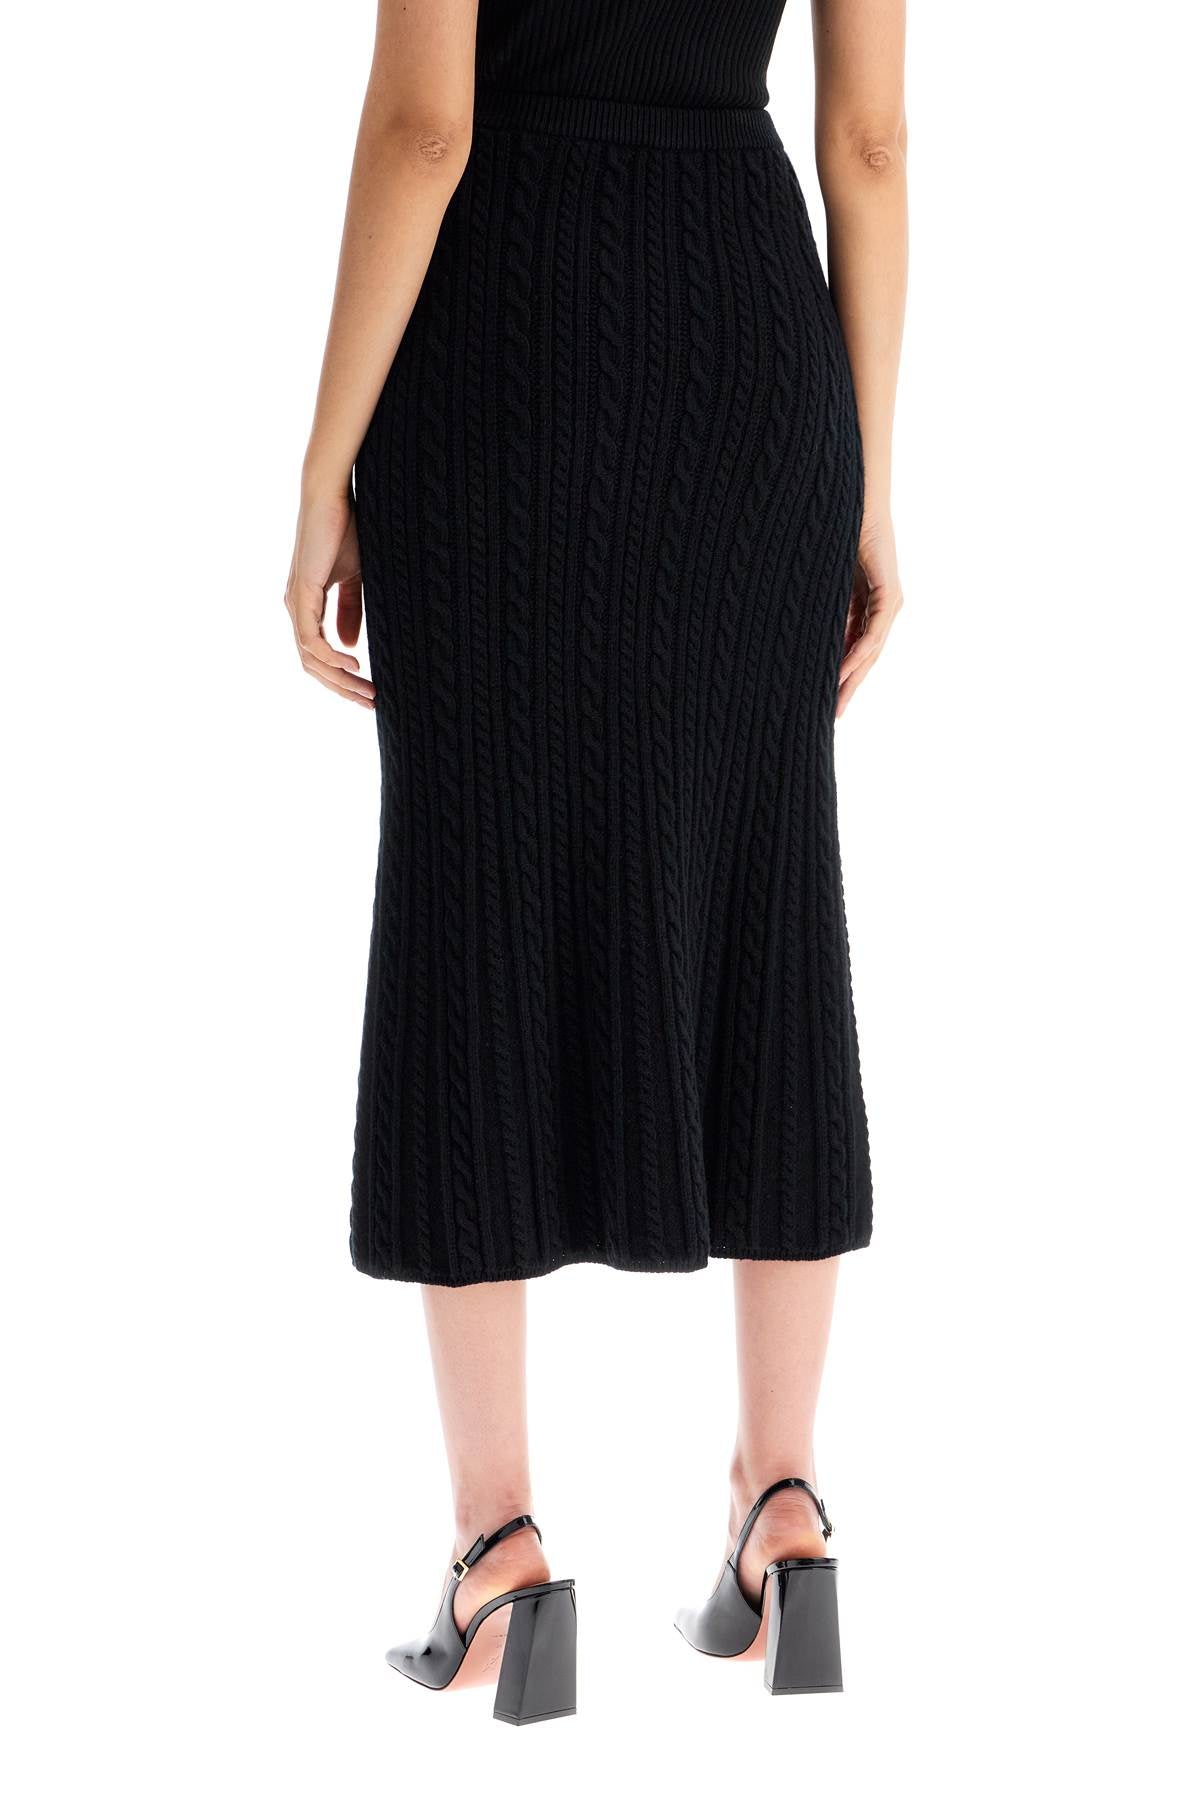 Alessandra Rich "knitted Midi Skirt With Cable Knit   Black